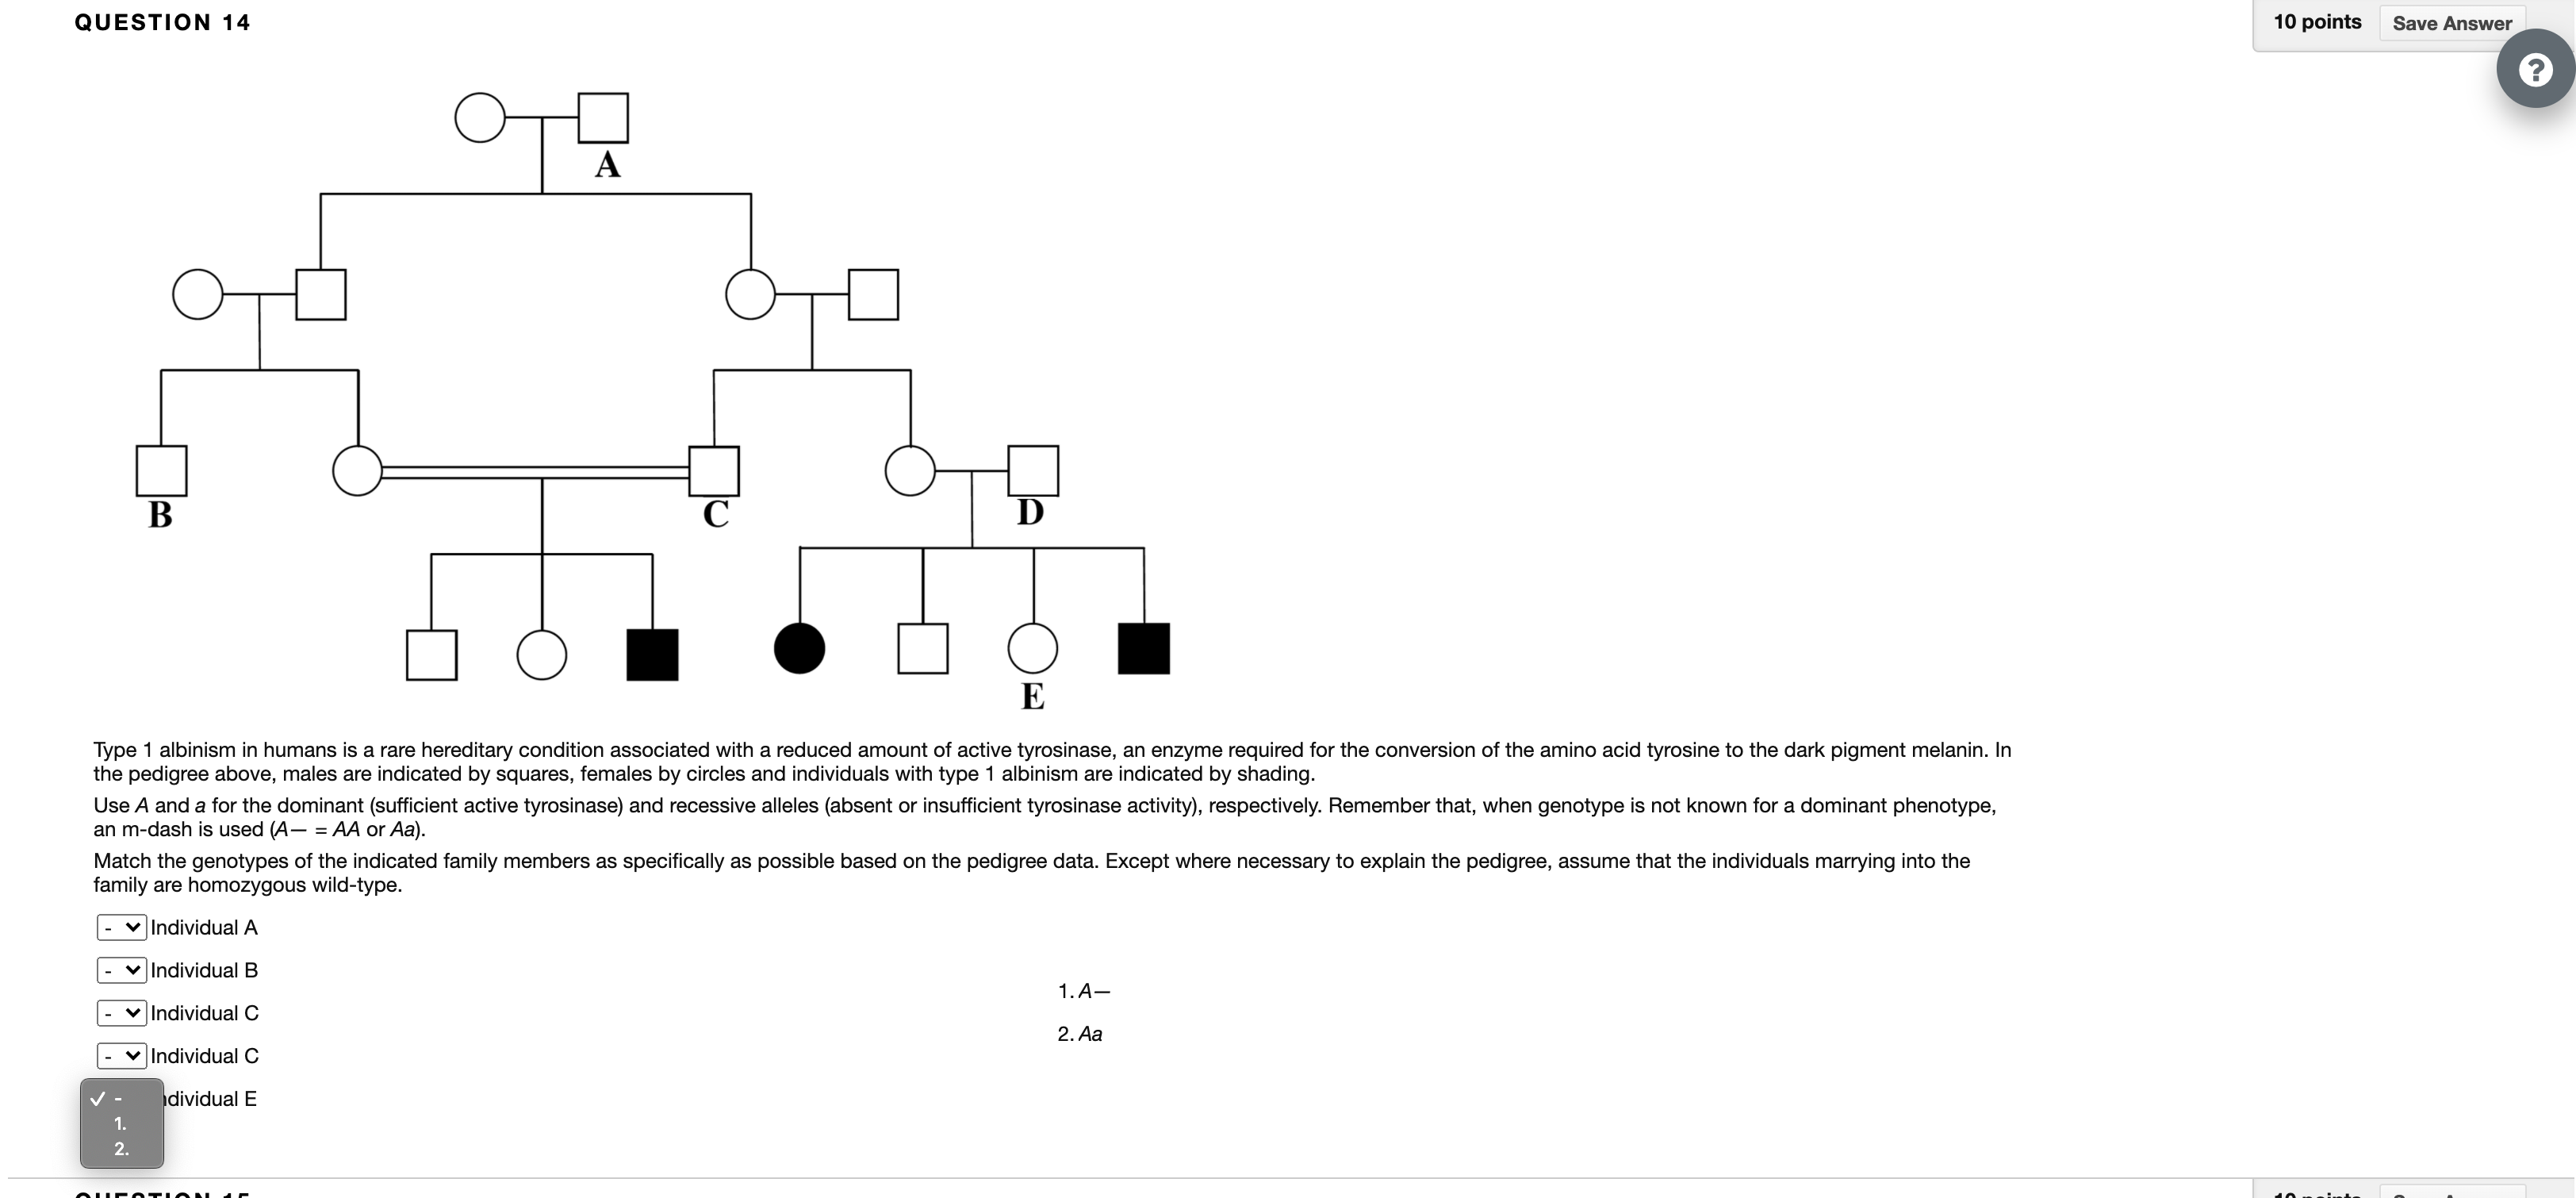 Match the genotypes of the indicated family members as specifically as possible based
